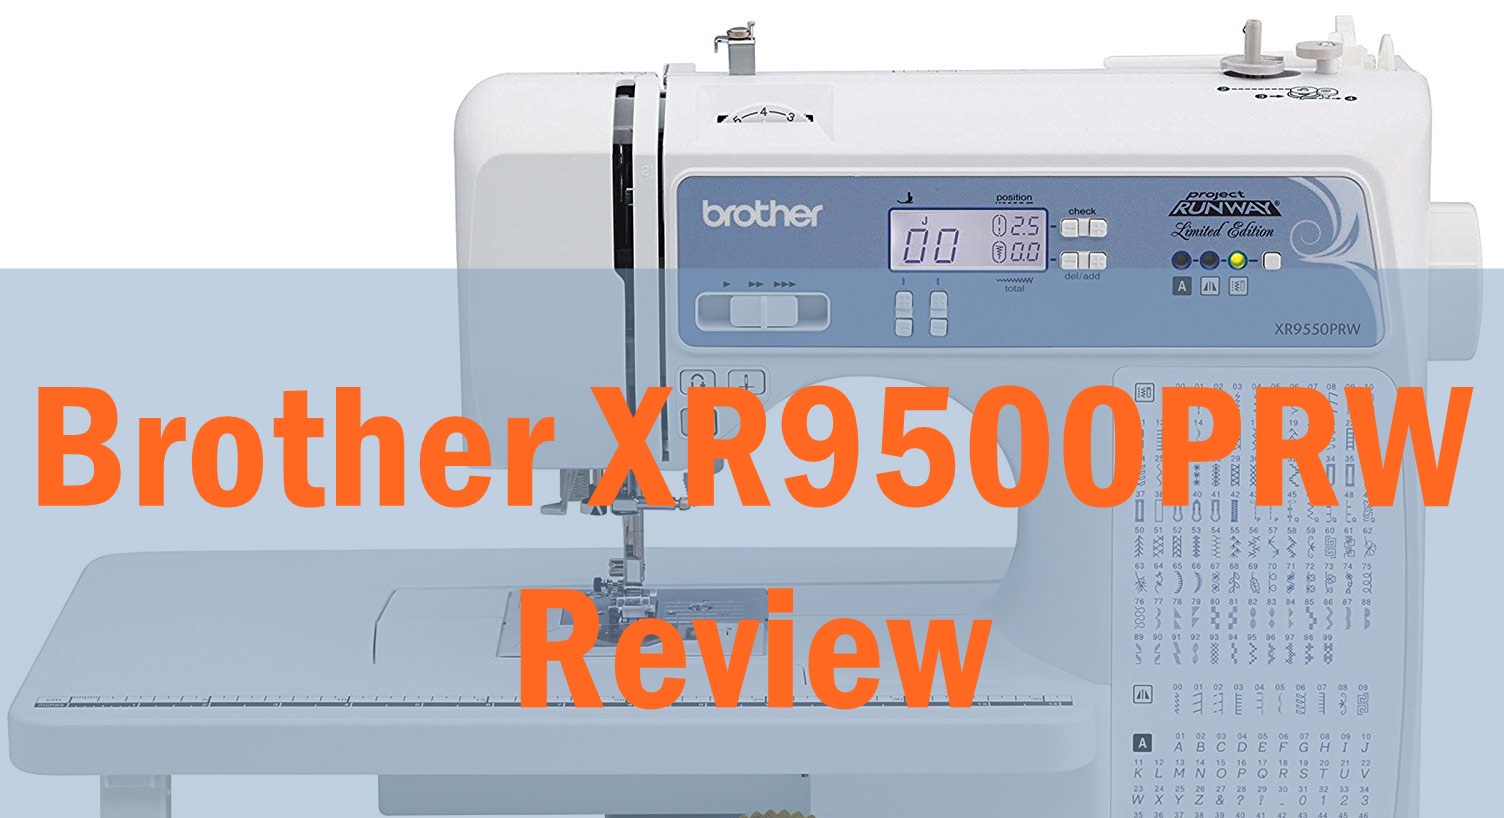 Brother XR9500PRW review